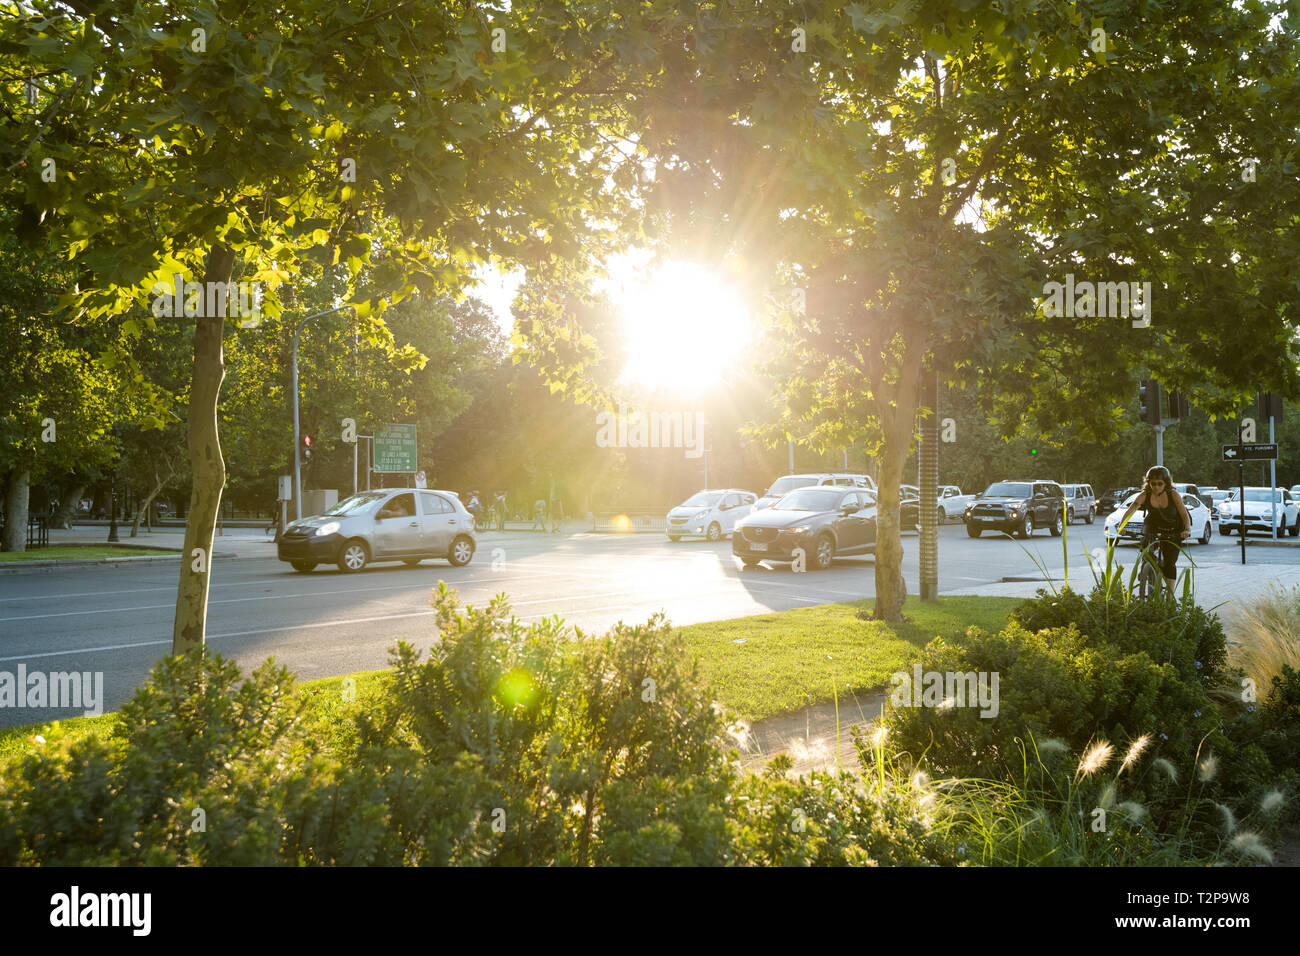 Santiago, Region Metropolitana, Chile - December 11, 2018: Traffic in the Forestal Park at downtown with a setting sun. Stock Photo